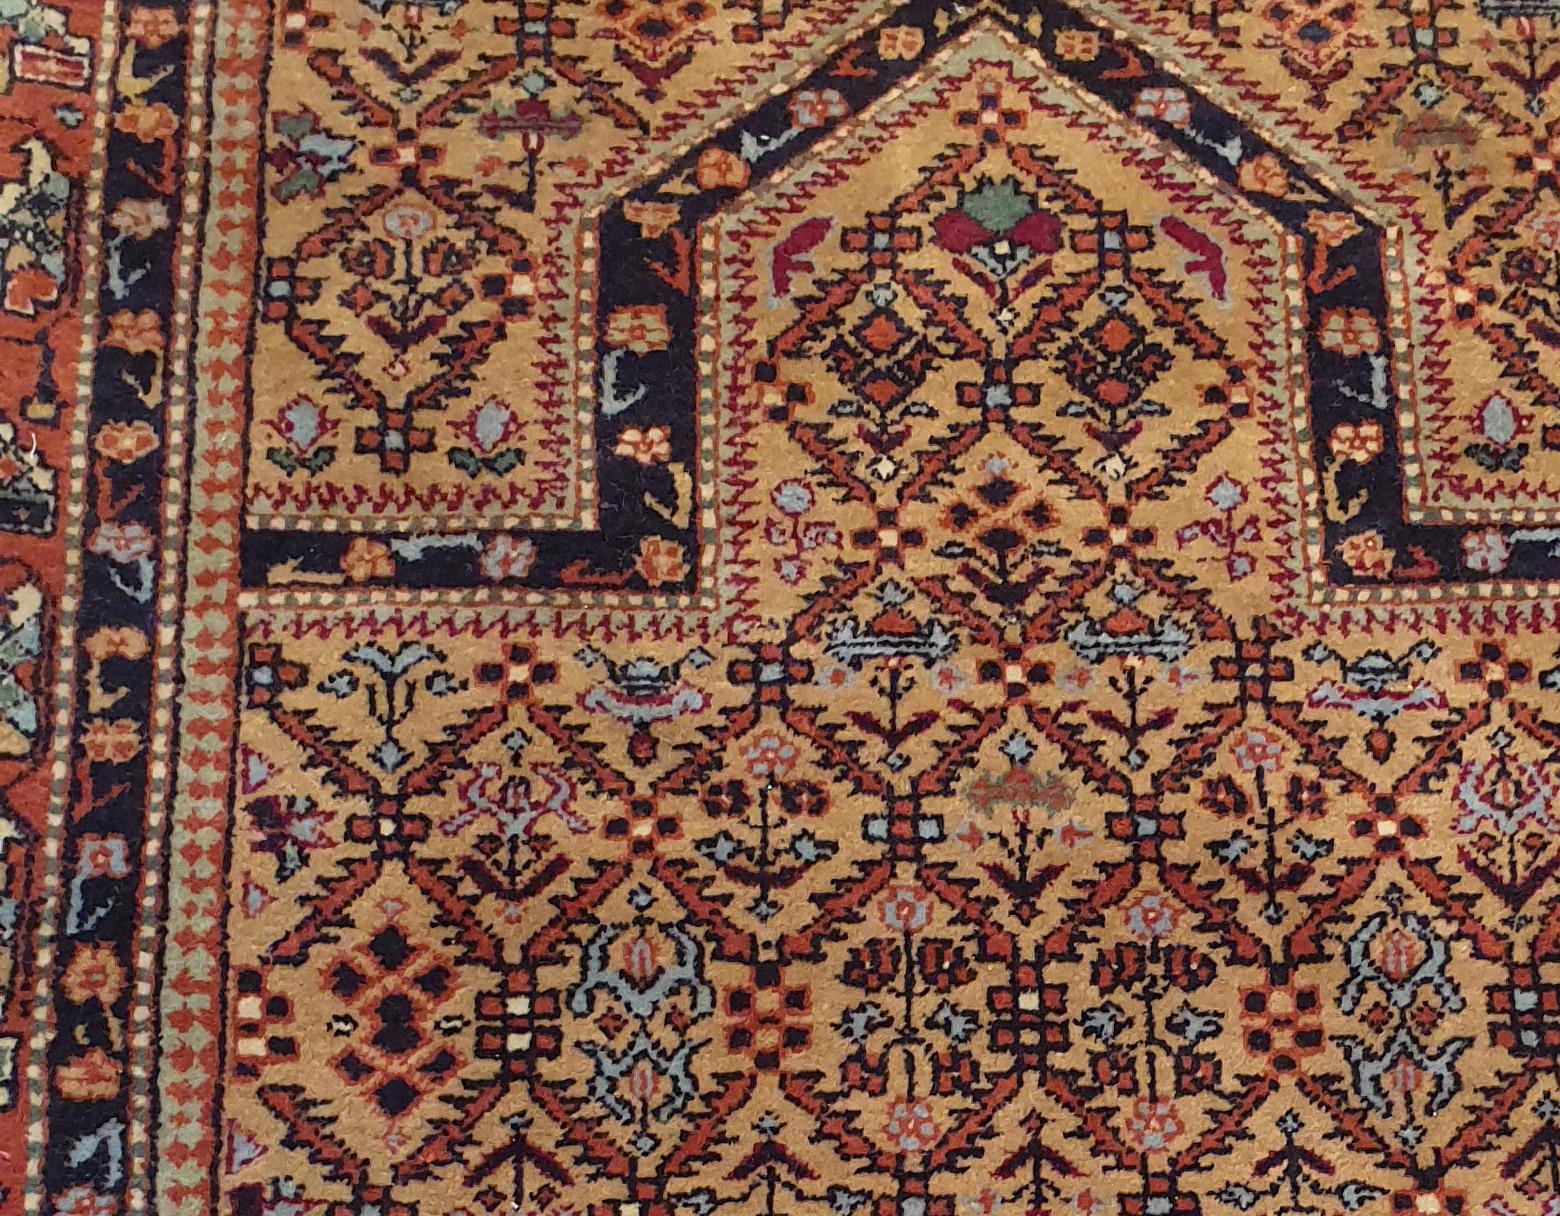 Hand-Knotted  Caucasian Chirvan Carpet, 19th Century - N° 730 For Sale